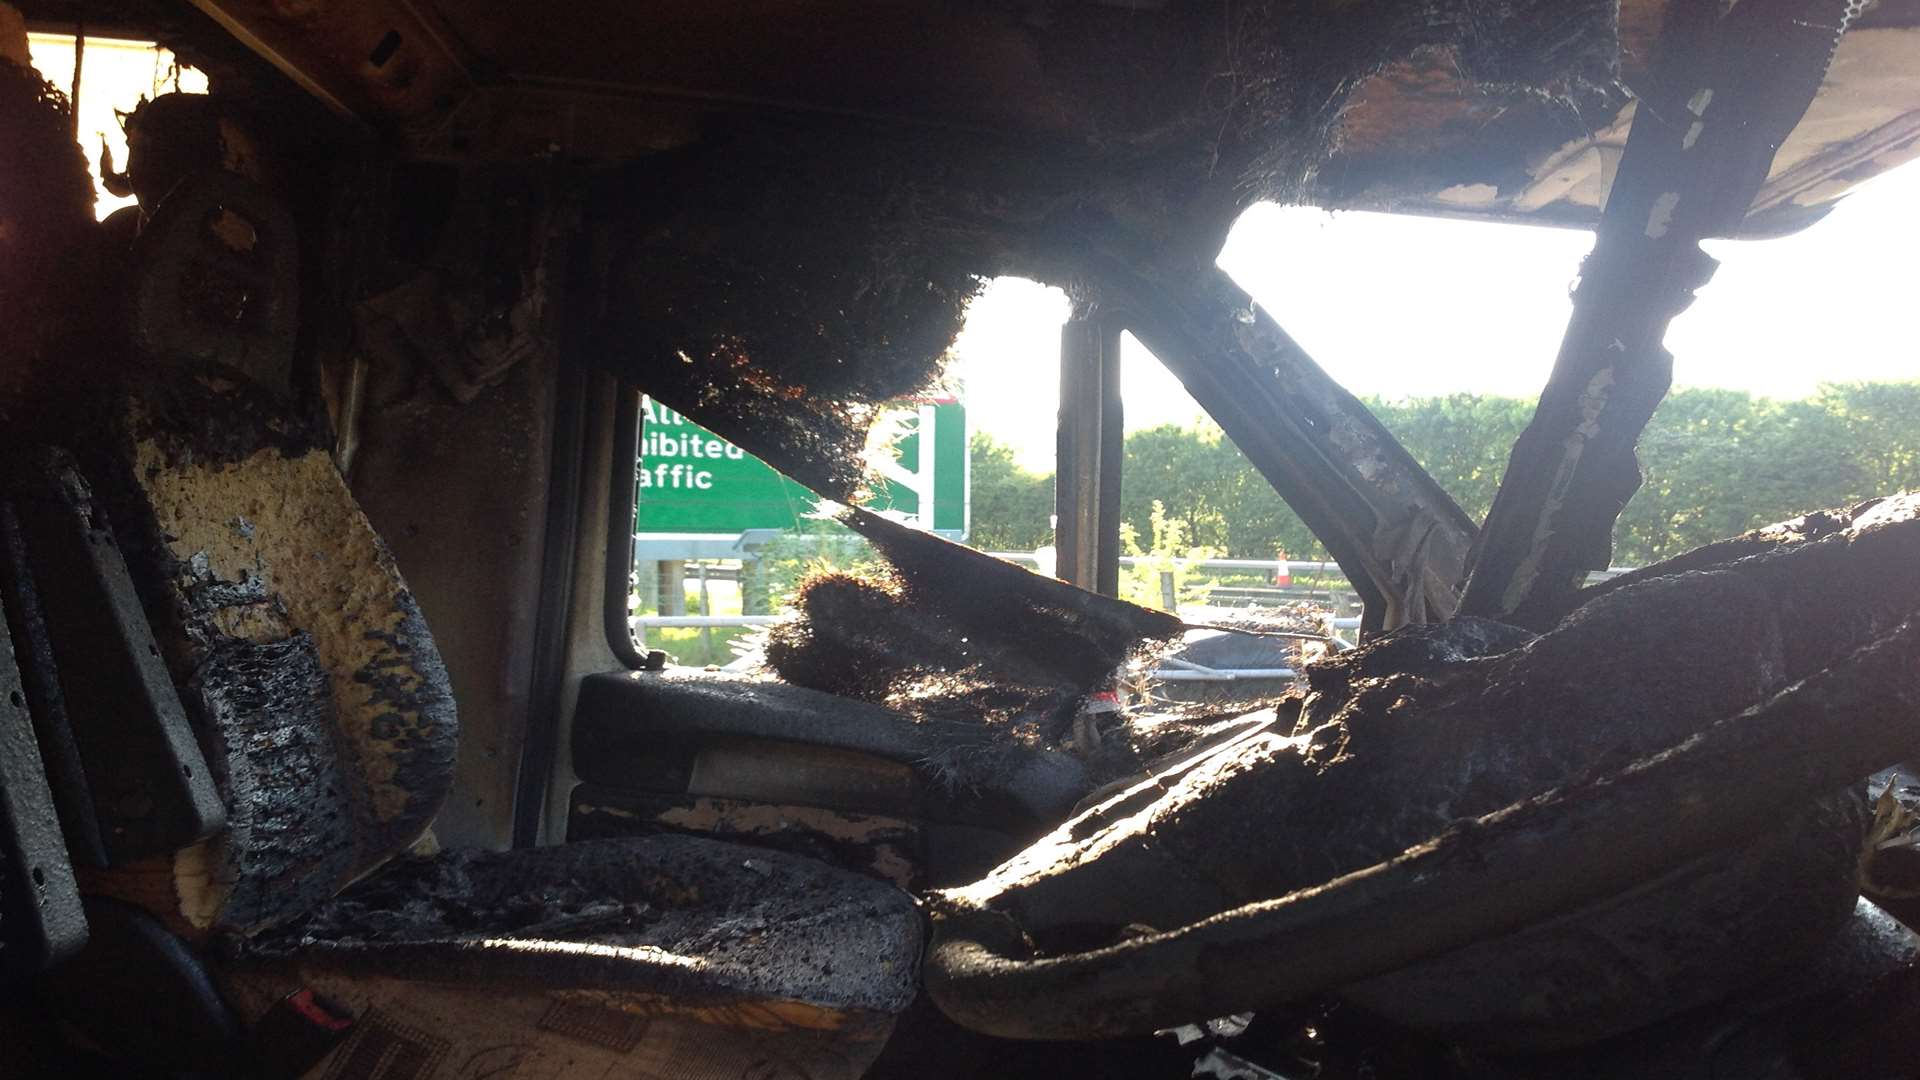 The inside of the cab is unrecognisable. Picture: Gina Fuller